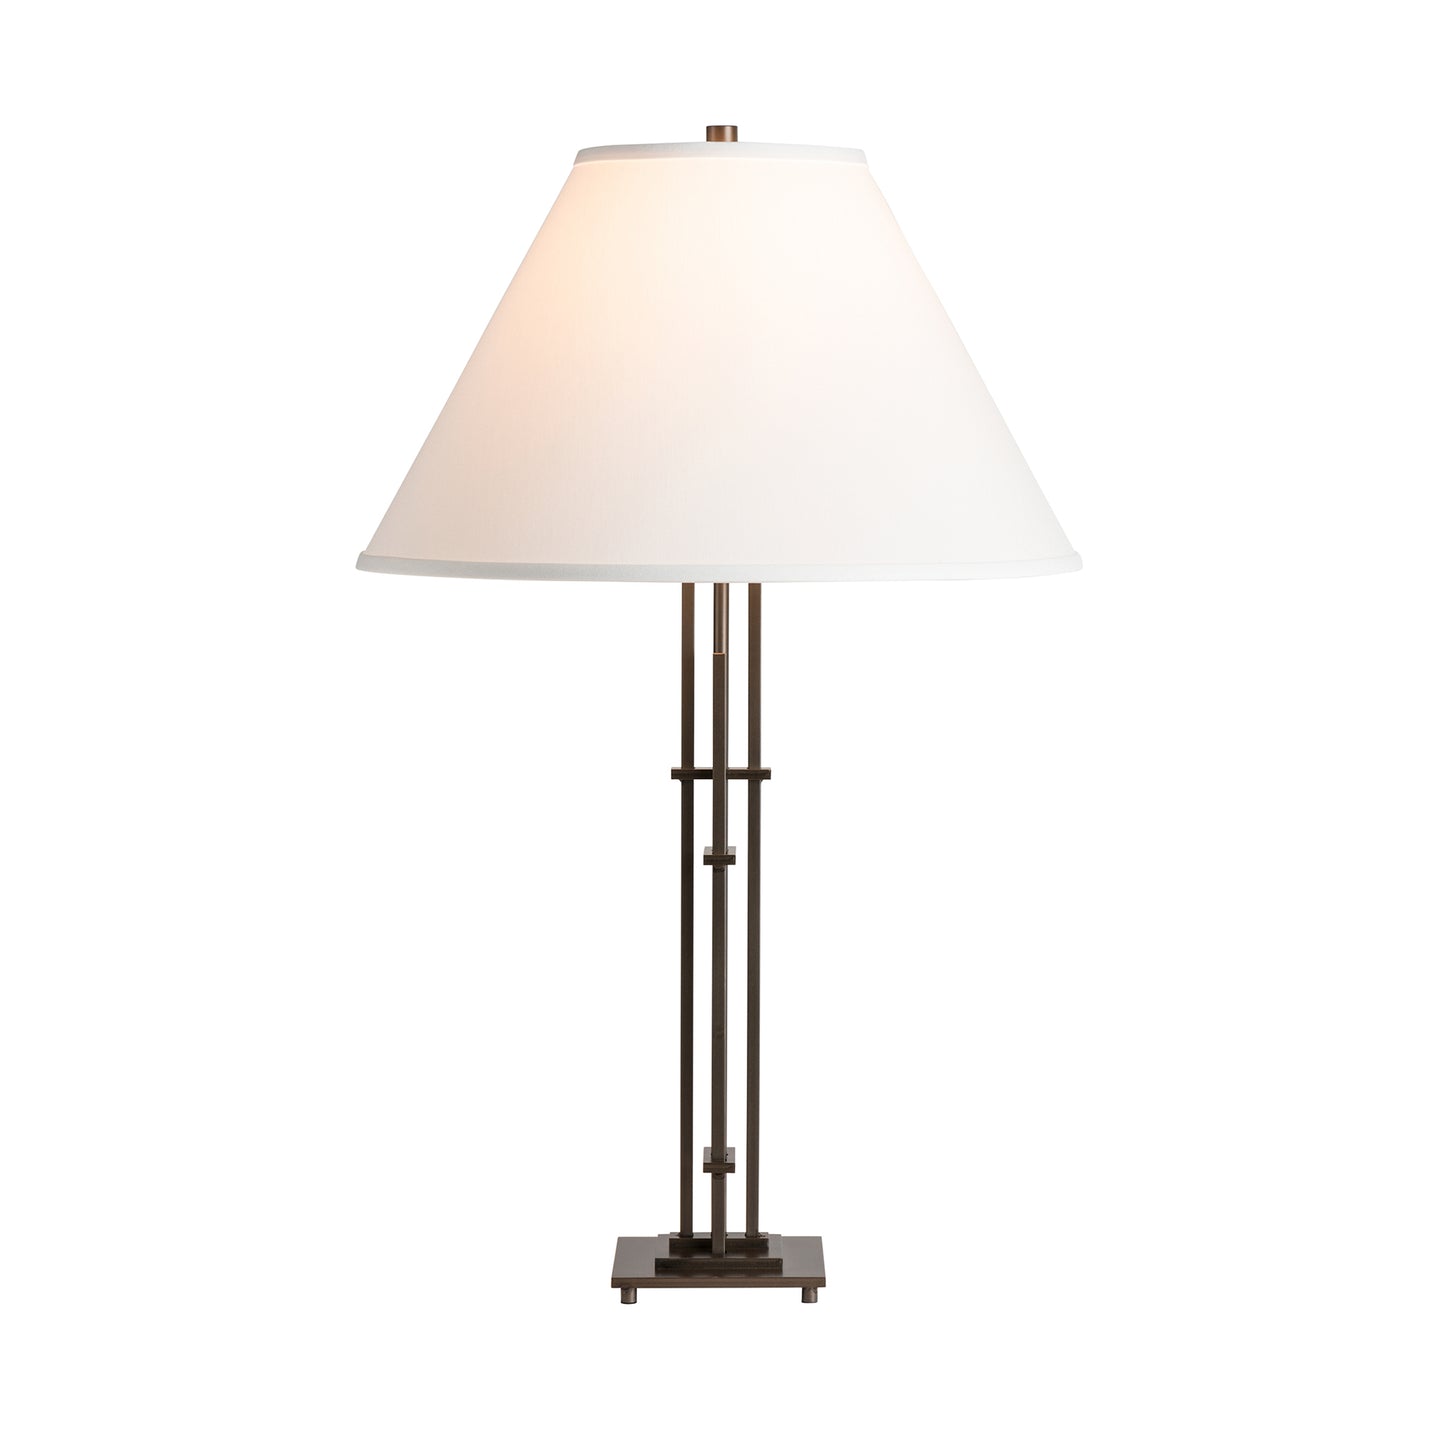 A Hubbardton Forge Metra Quad Table Lamp with a white cone-shaped shade and a hand-forged wrought iron base featuring vertical rod support. The lamp is illuminated and set against a plain white background.